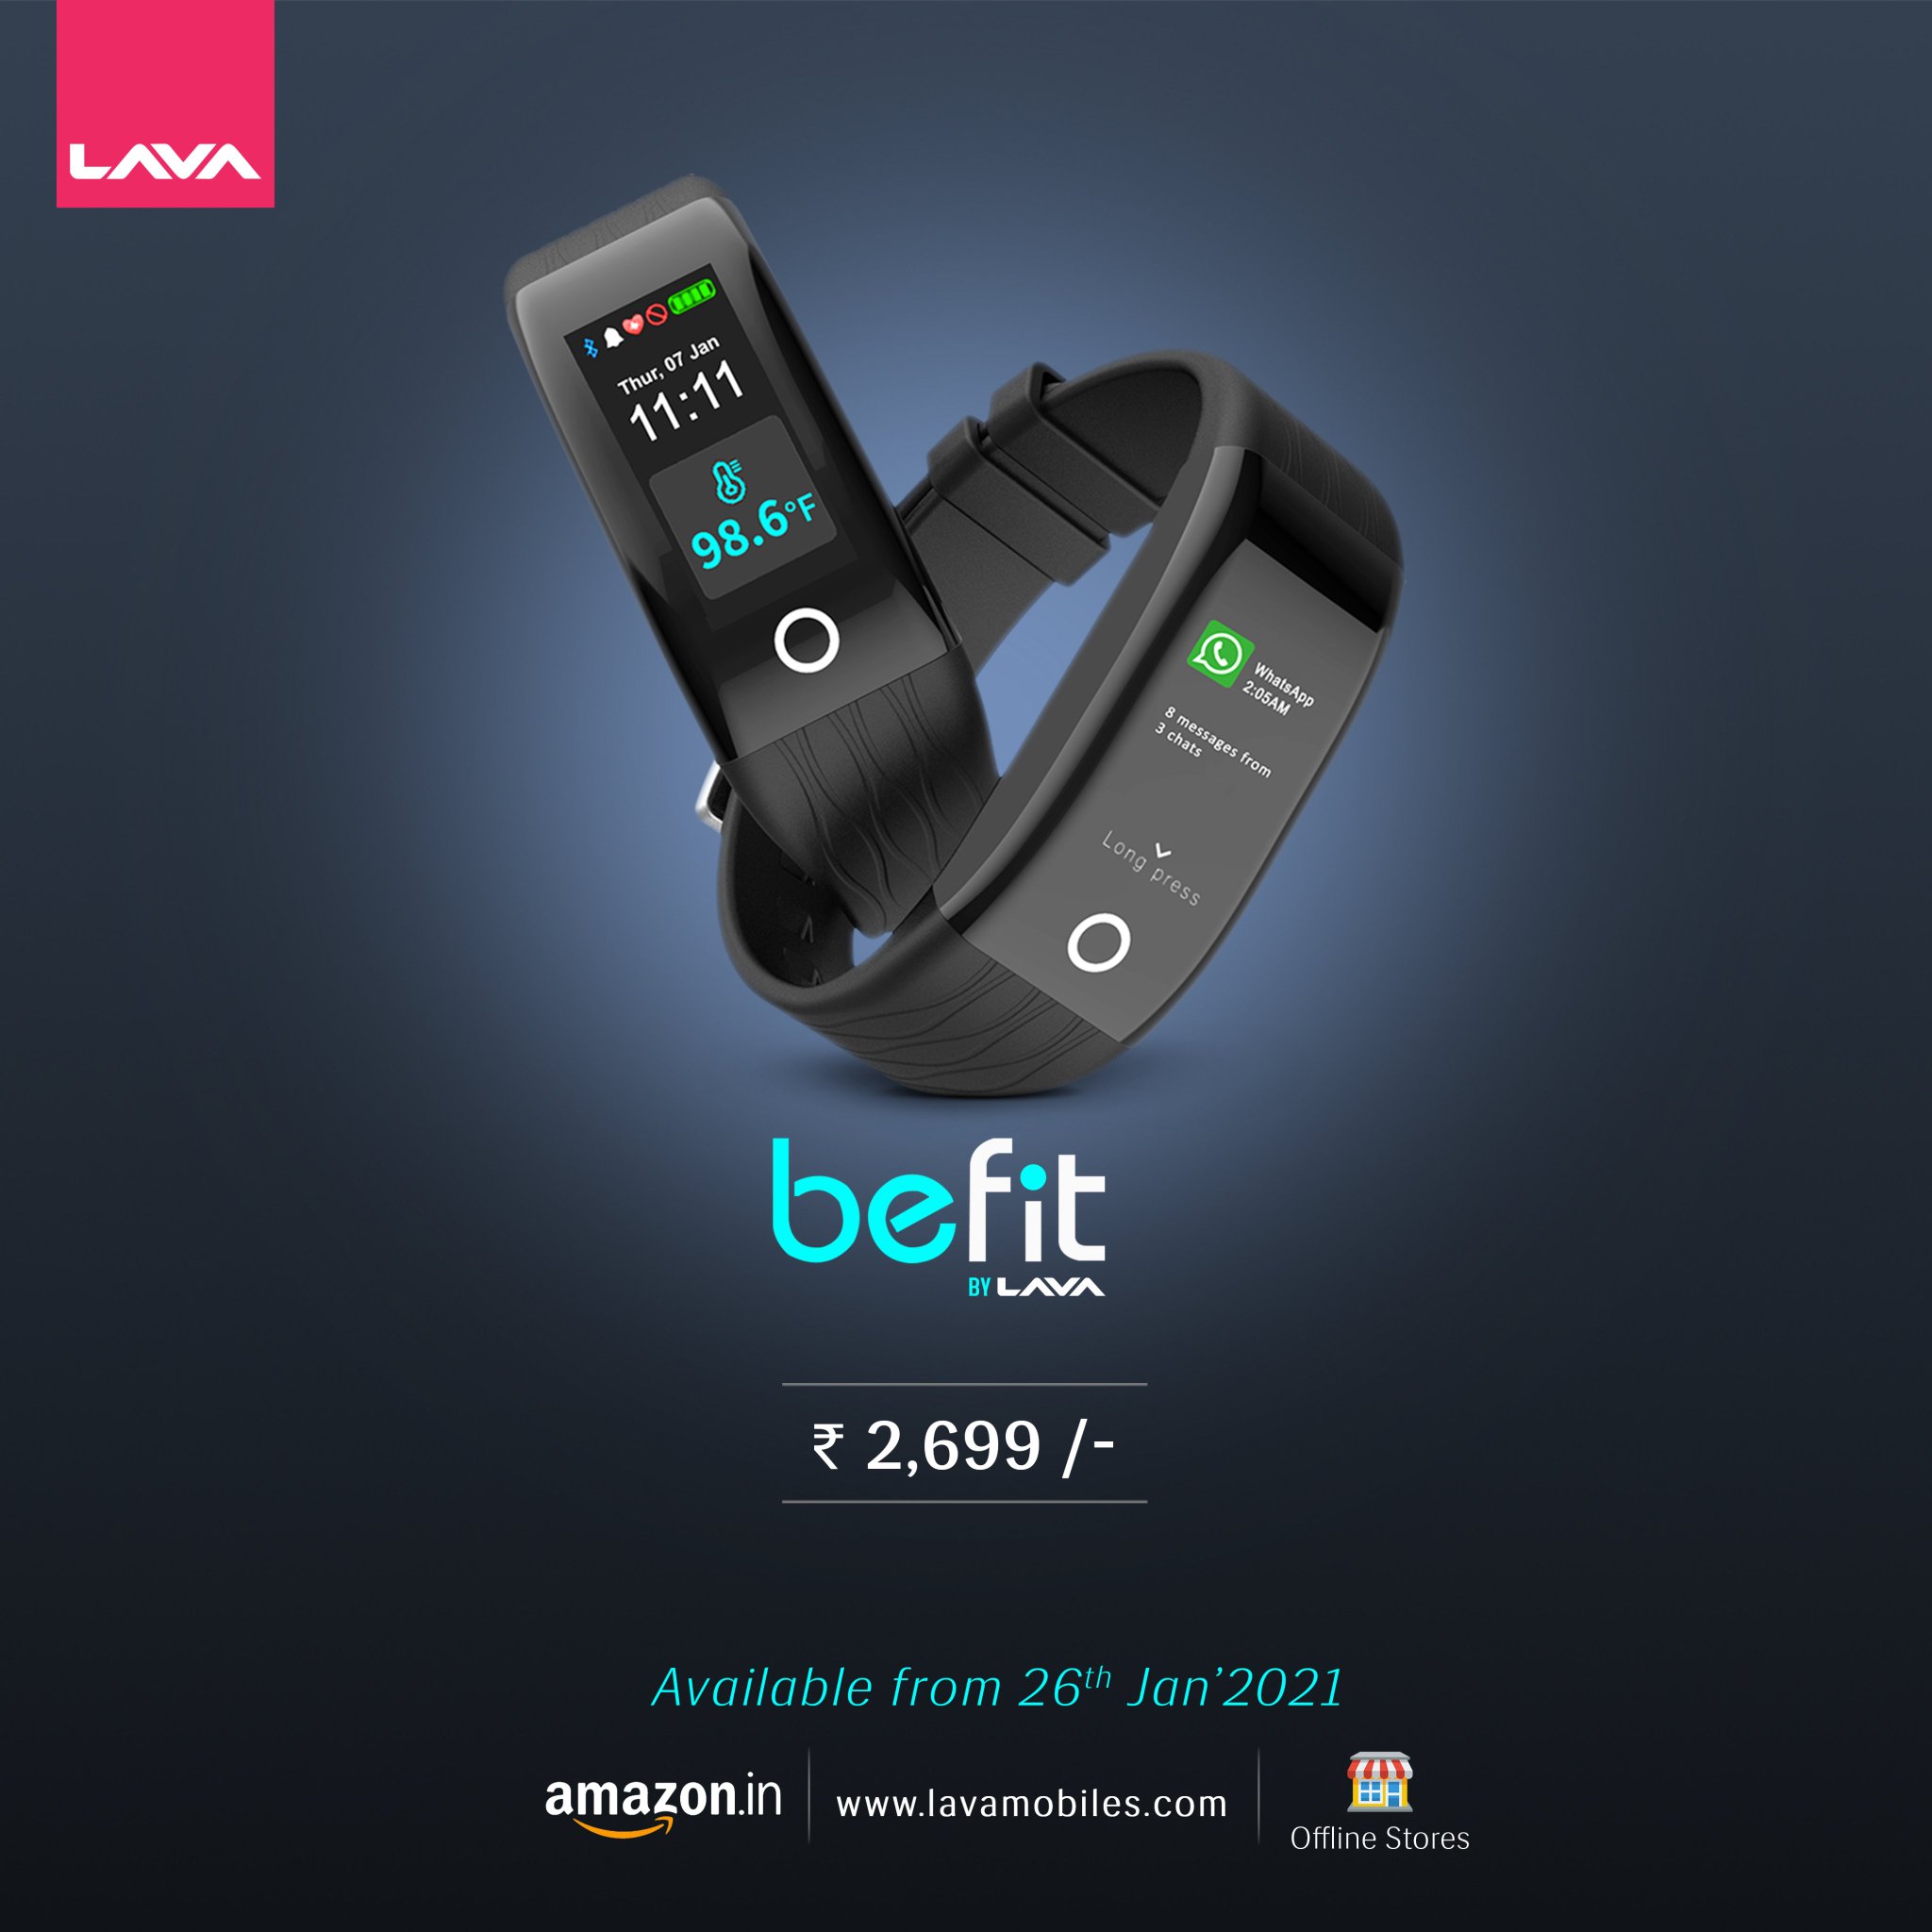 Lava BeFit now available on Flipkart at a special price of INR 2299